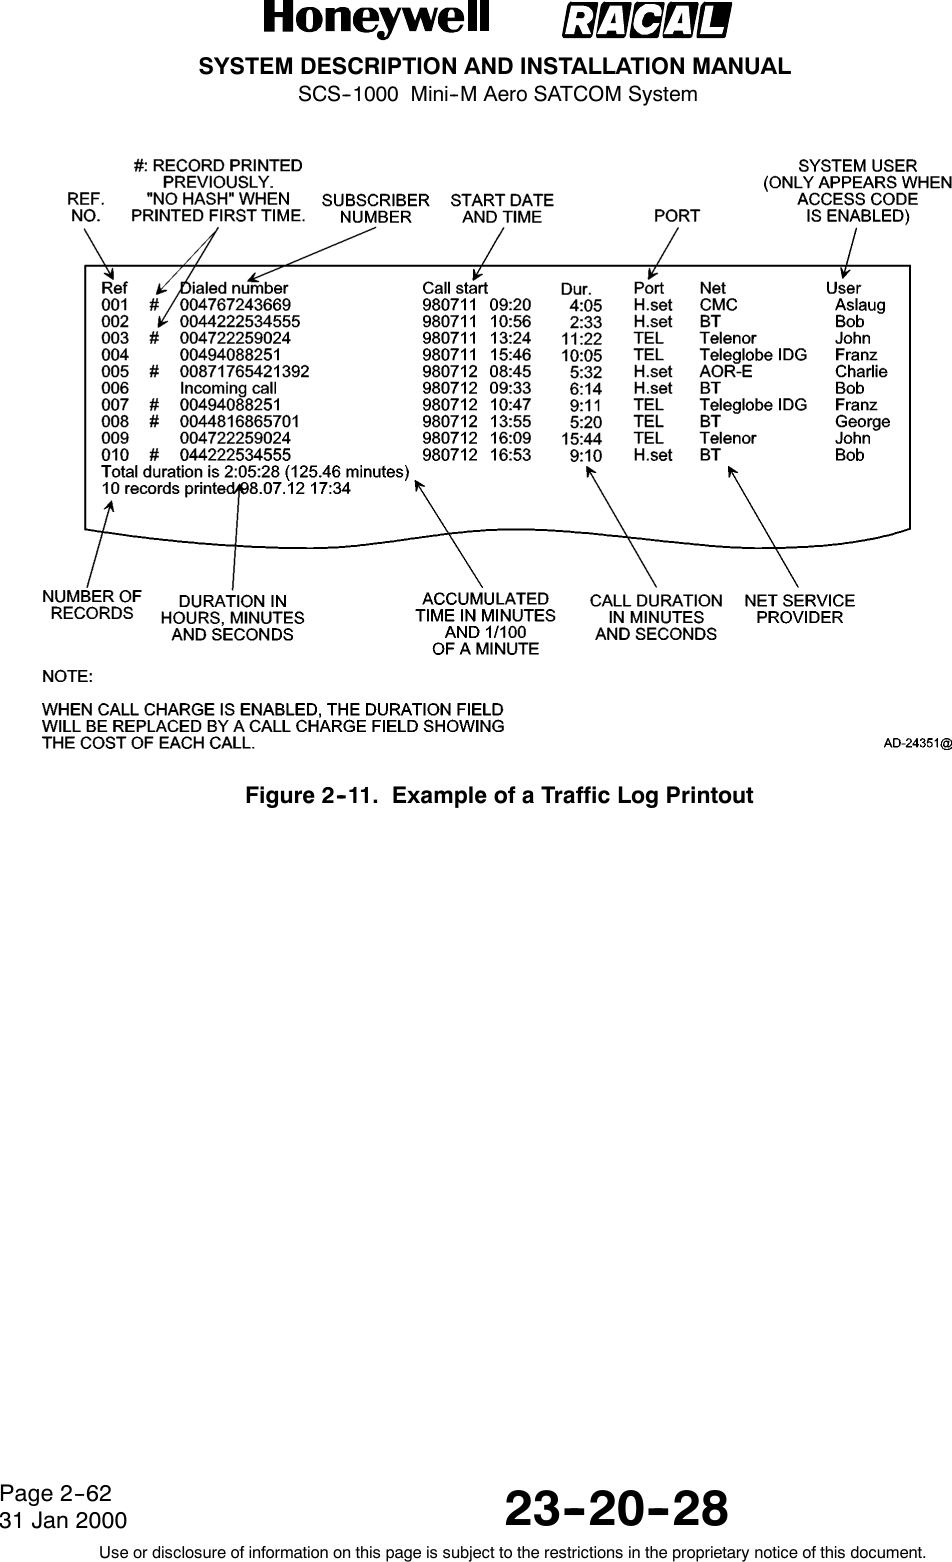 SYSTEM DESCRIPTION AND INSTALLATION MANUALSCS--1000 Mini--M Aero SATCOM System23--20--28Use or disclosure of information on this page is subject to the restrictions in the proprietary notice of this document.Page 2--6231 Jan 2000Figure 2--11. Example of a Traffic Log Printout